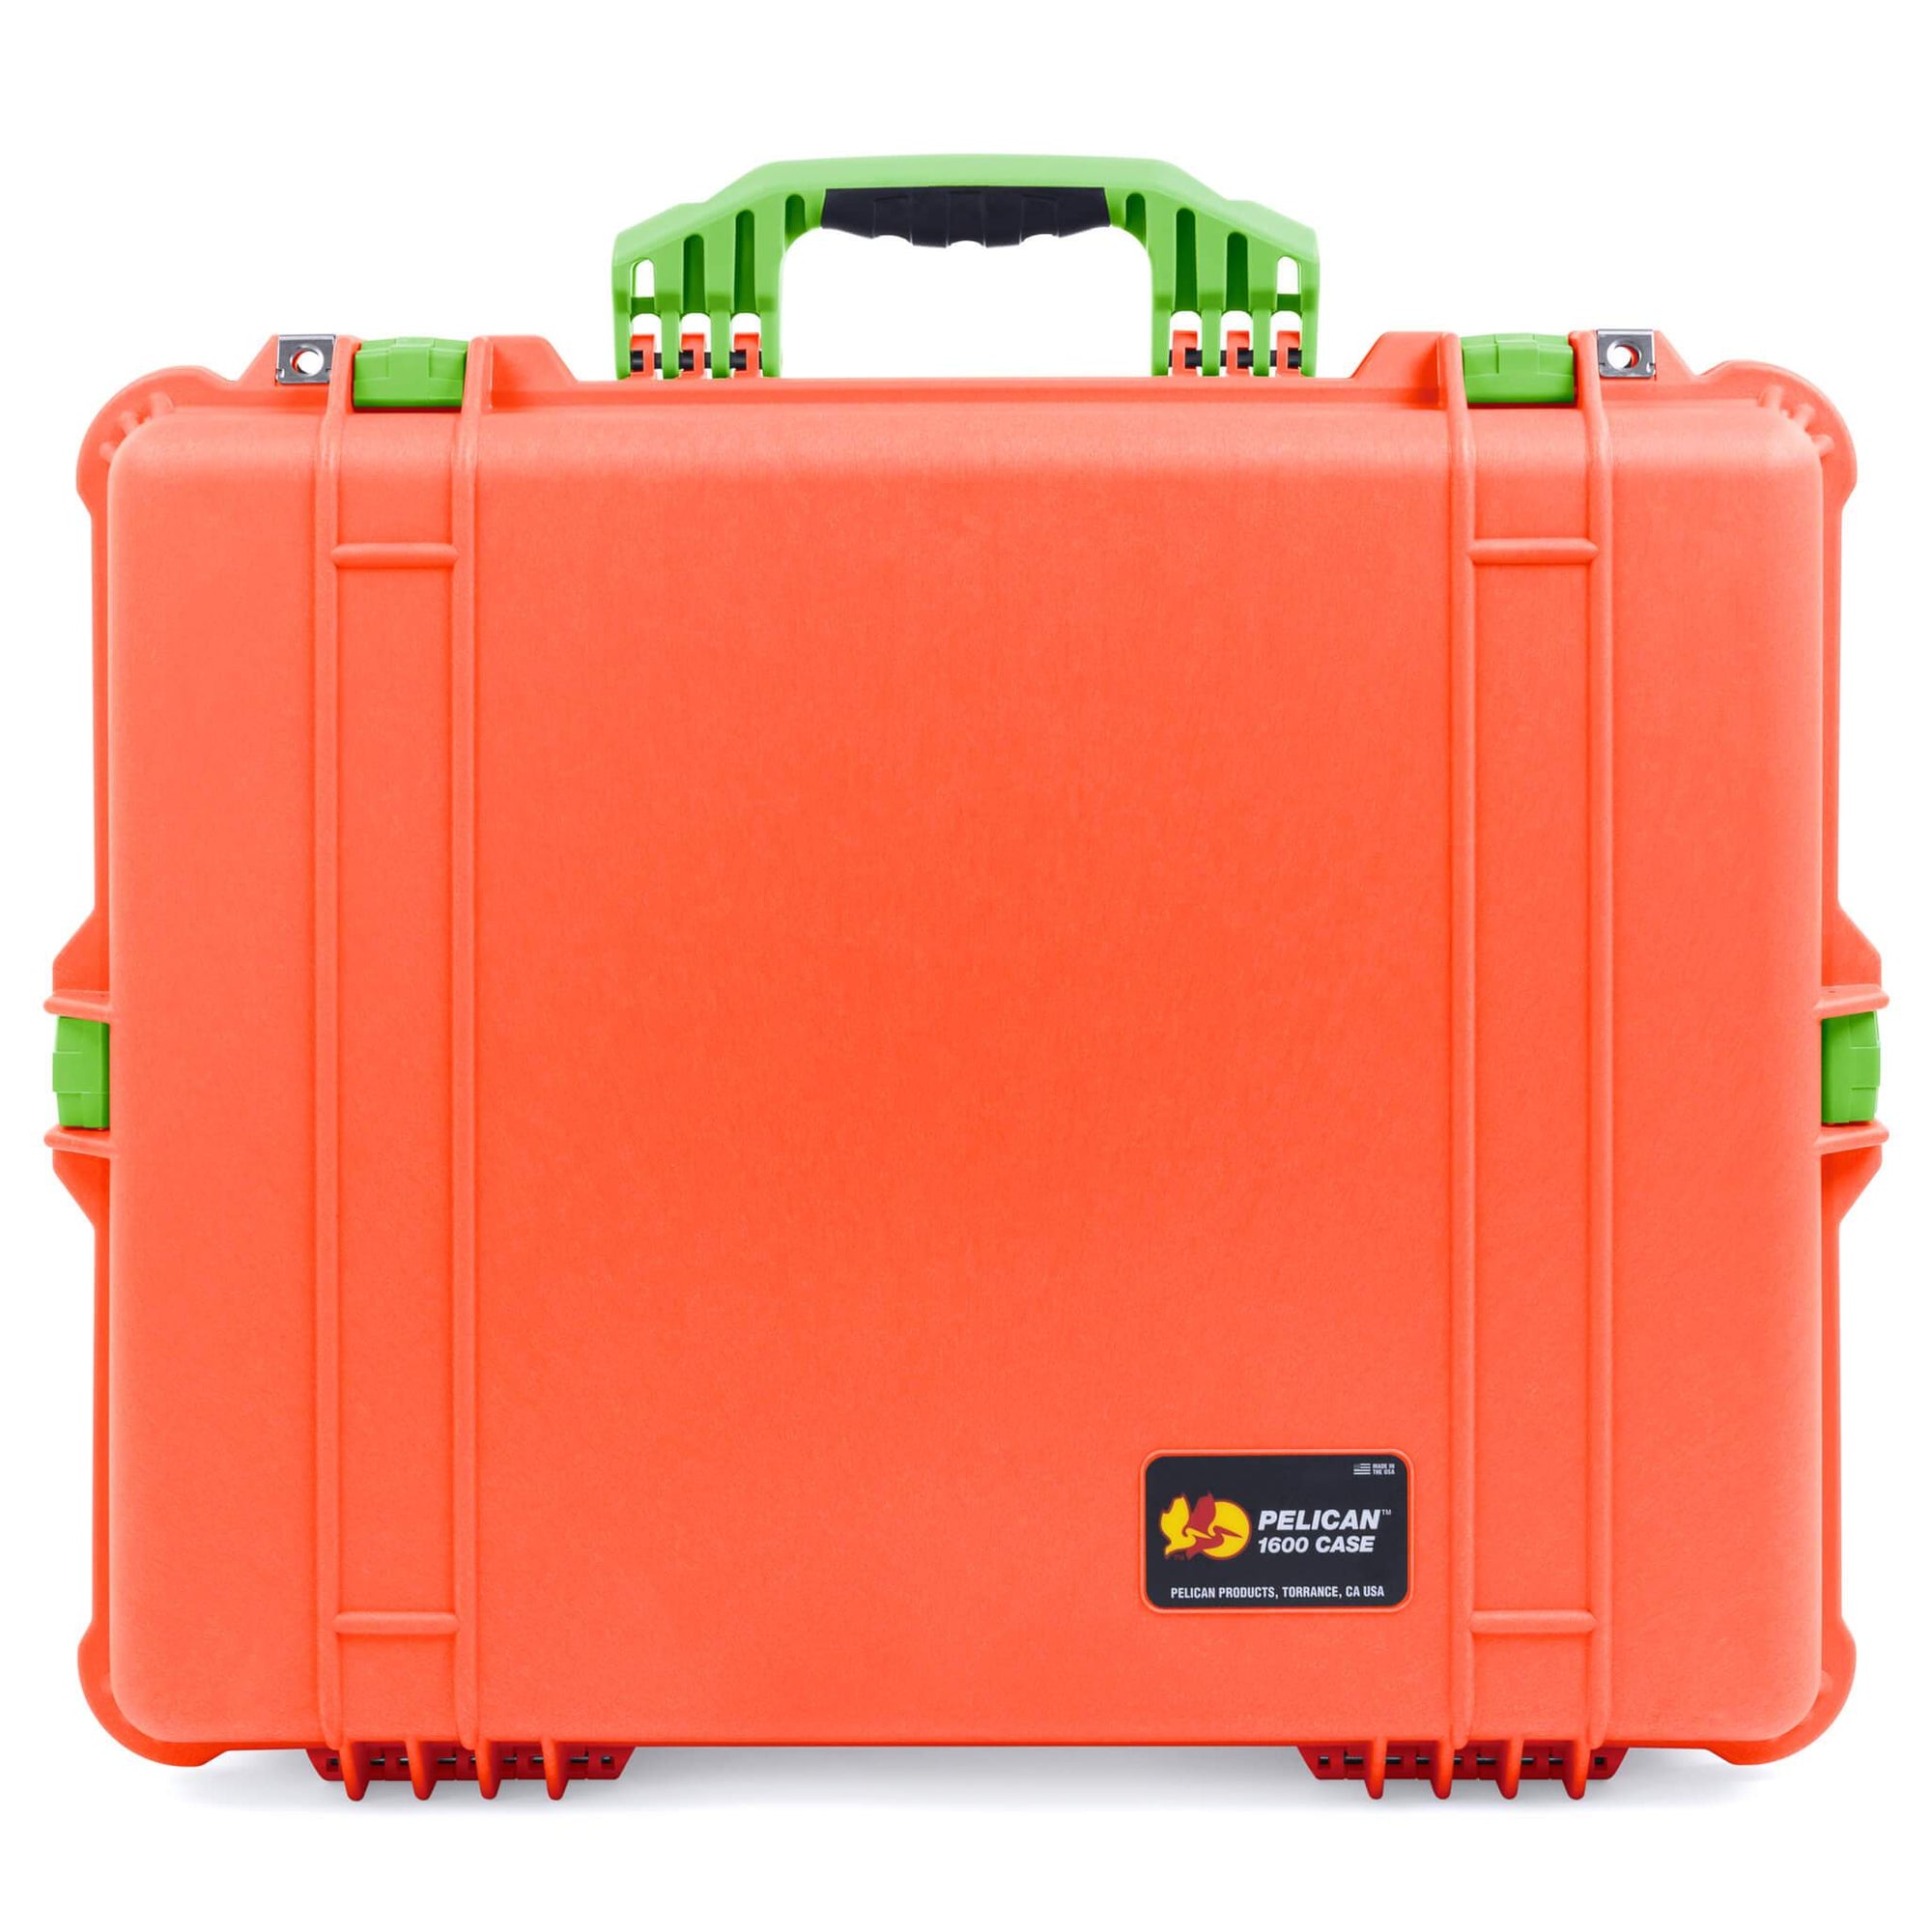 Pelican 1600 Case, Orange with Lime Green Handle & Latches ColorCase 